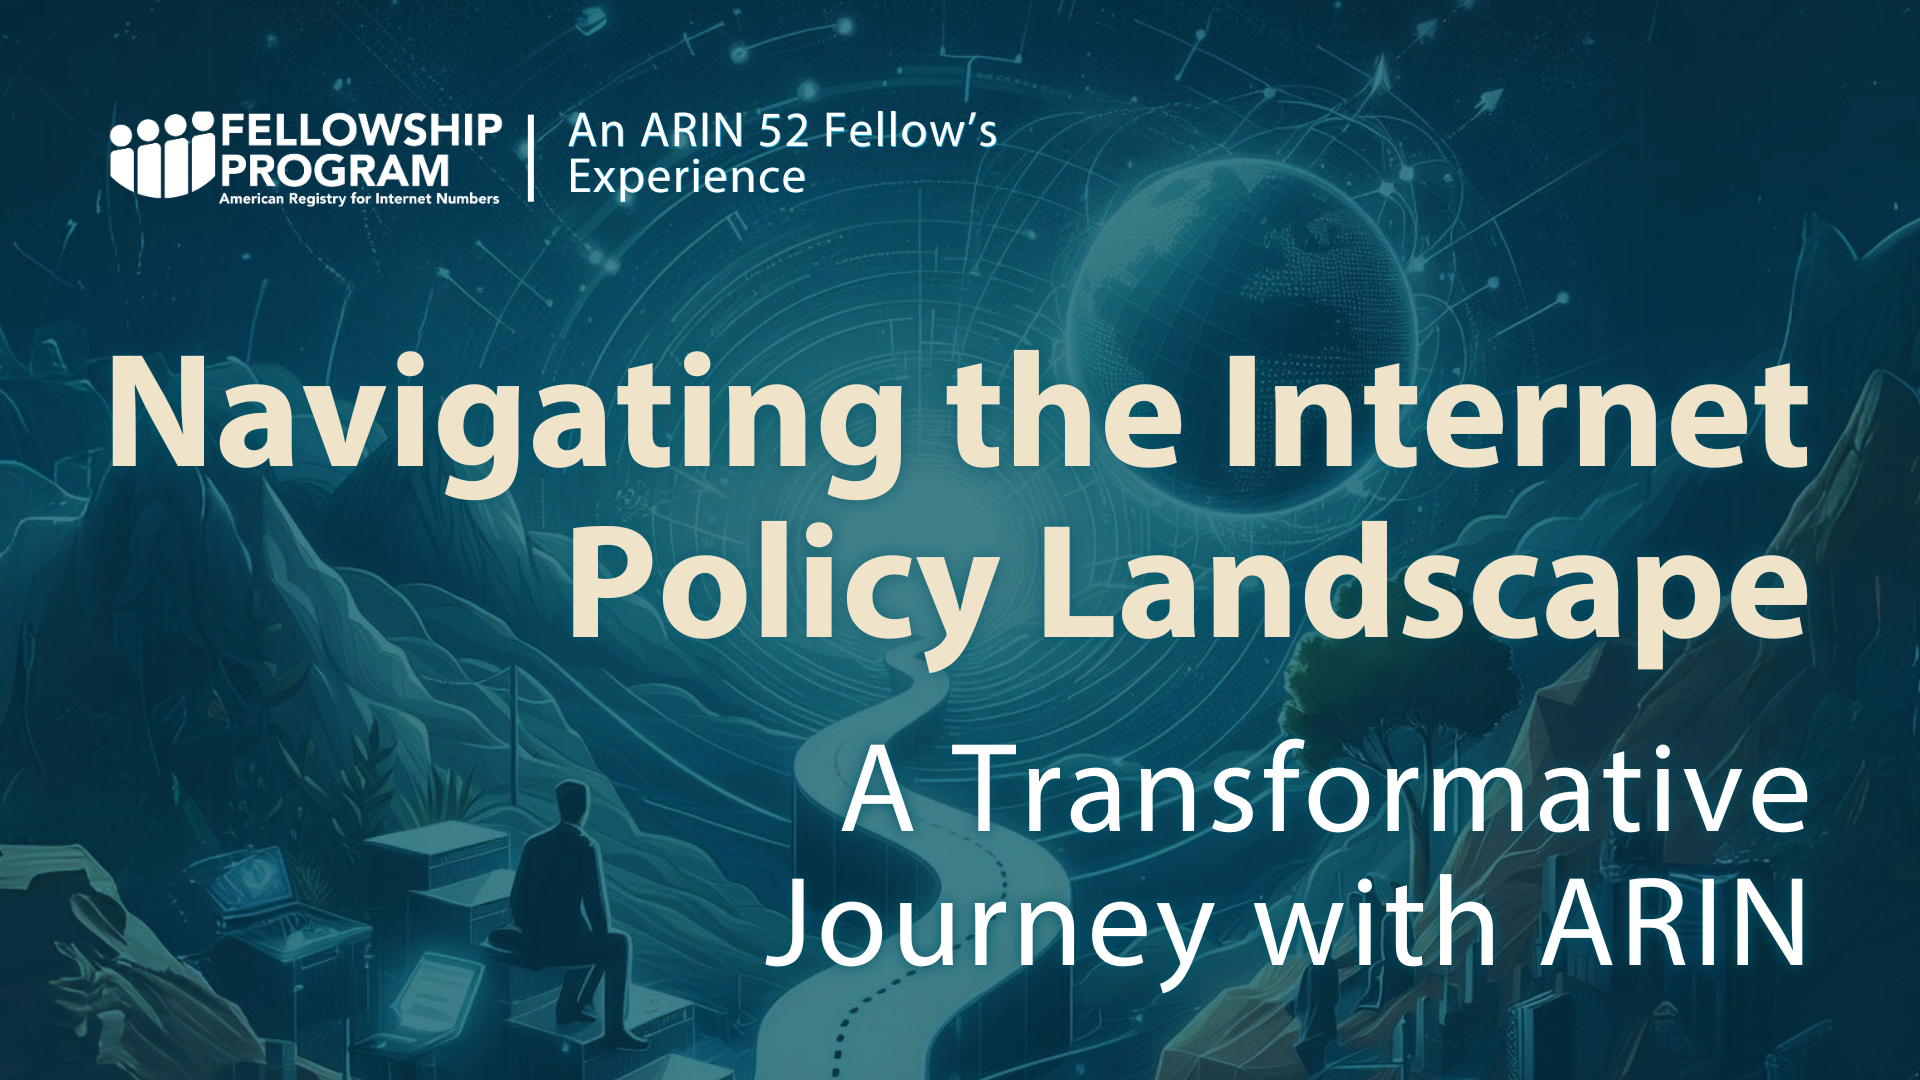 Read the blog Navigating the Internet Policy Landscape: A Transformative Journey with ARIN